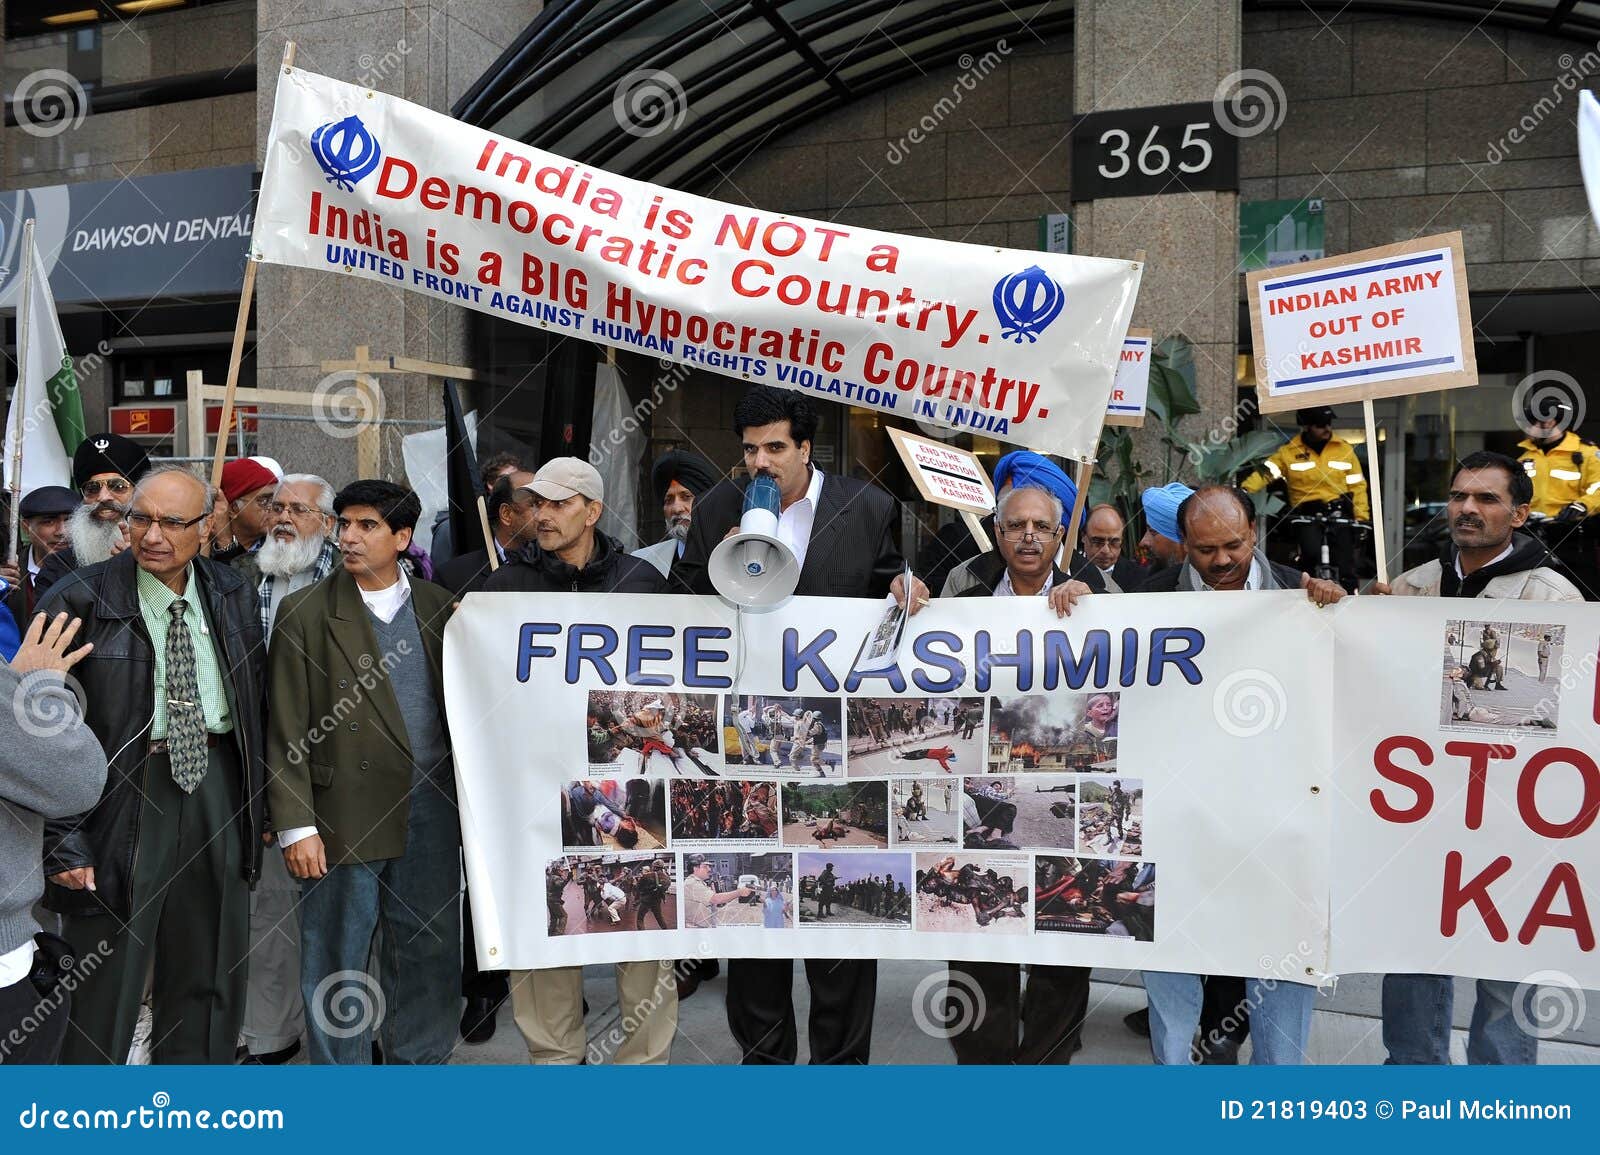 kashmir-protest-outside-indian-consulate-21819403.jpg